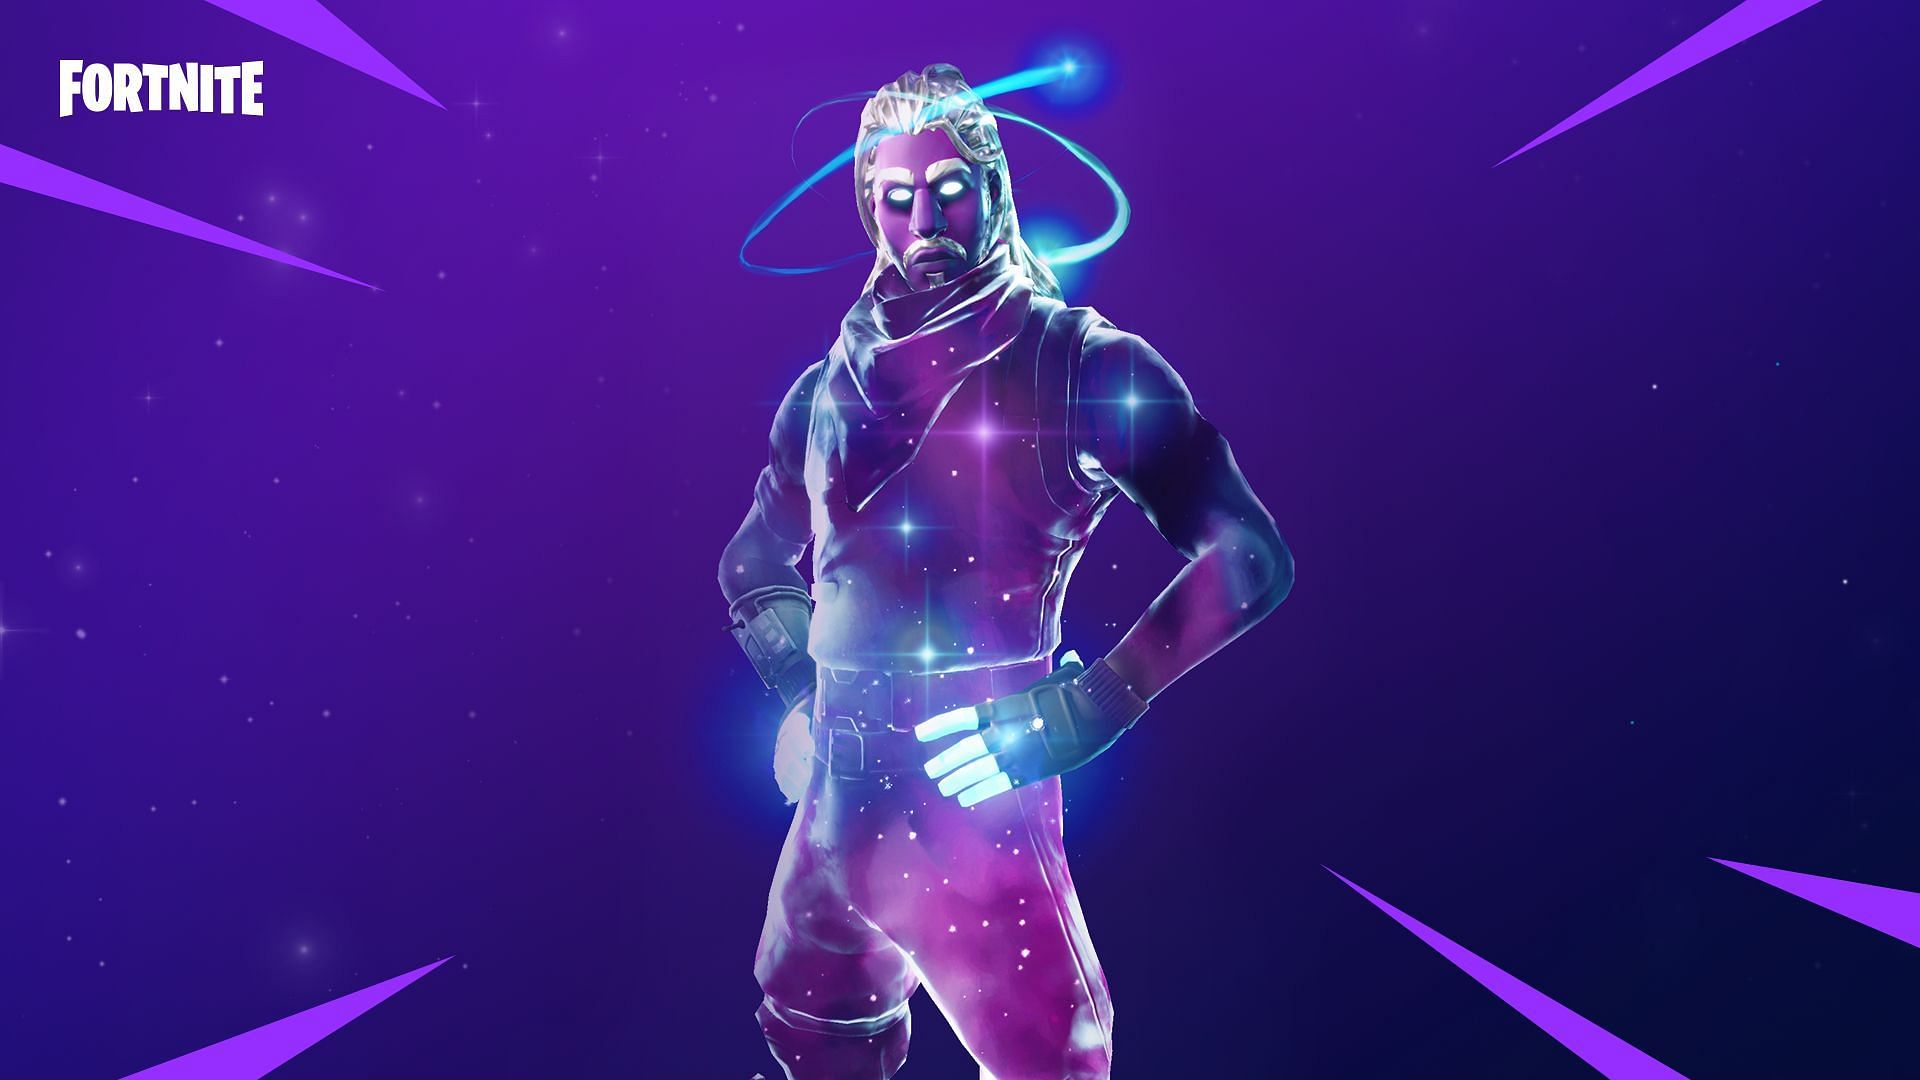 The Fortnite Galaxy Skin could be unvaulted soon